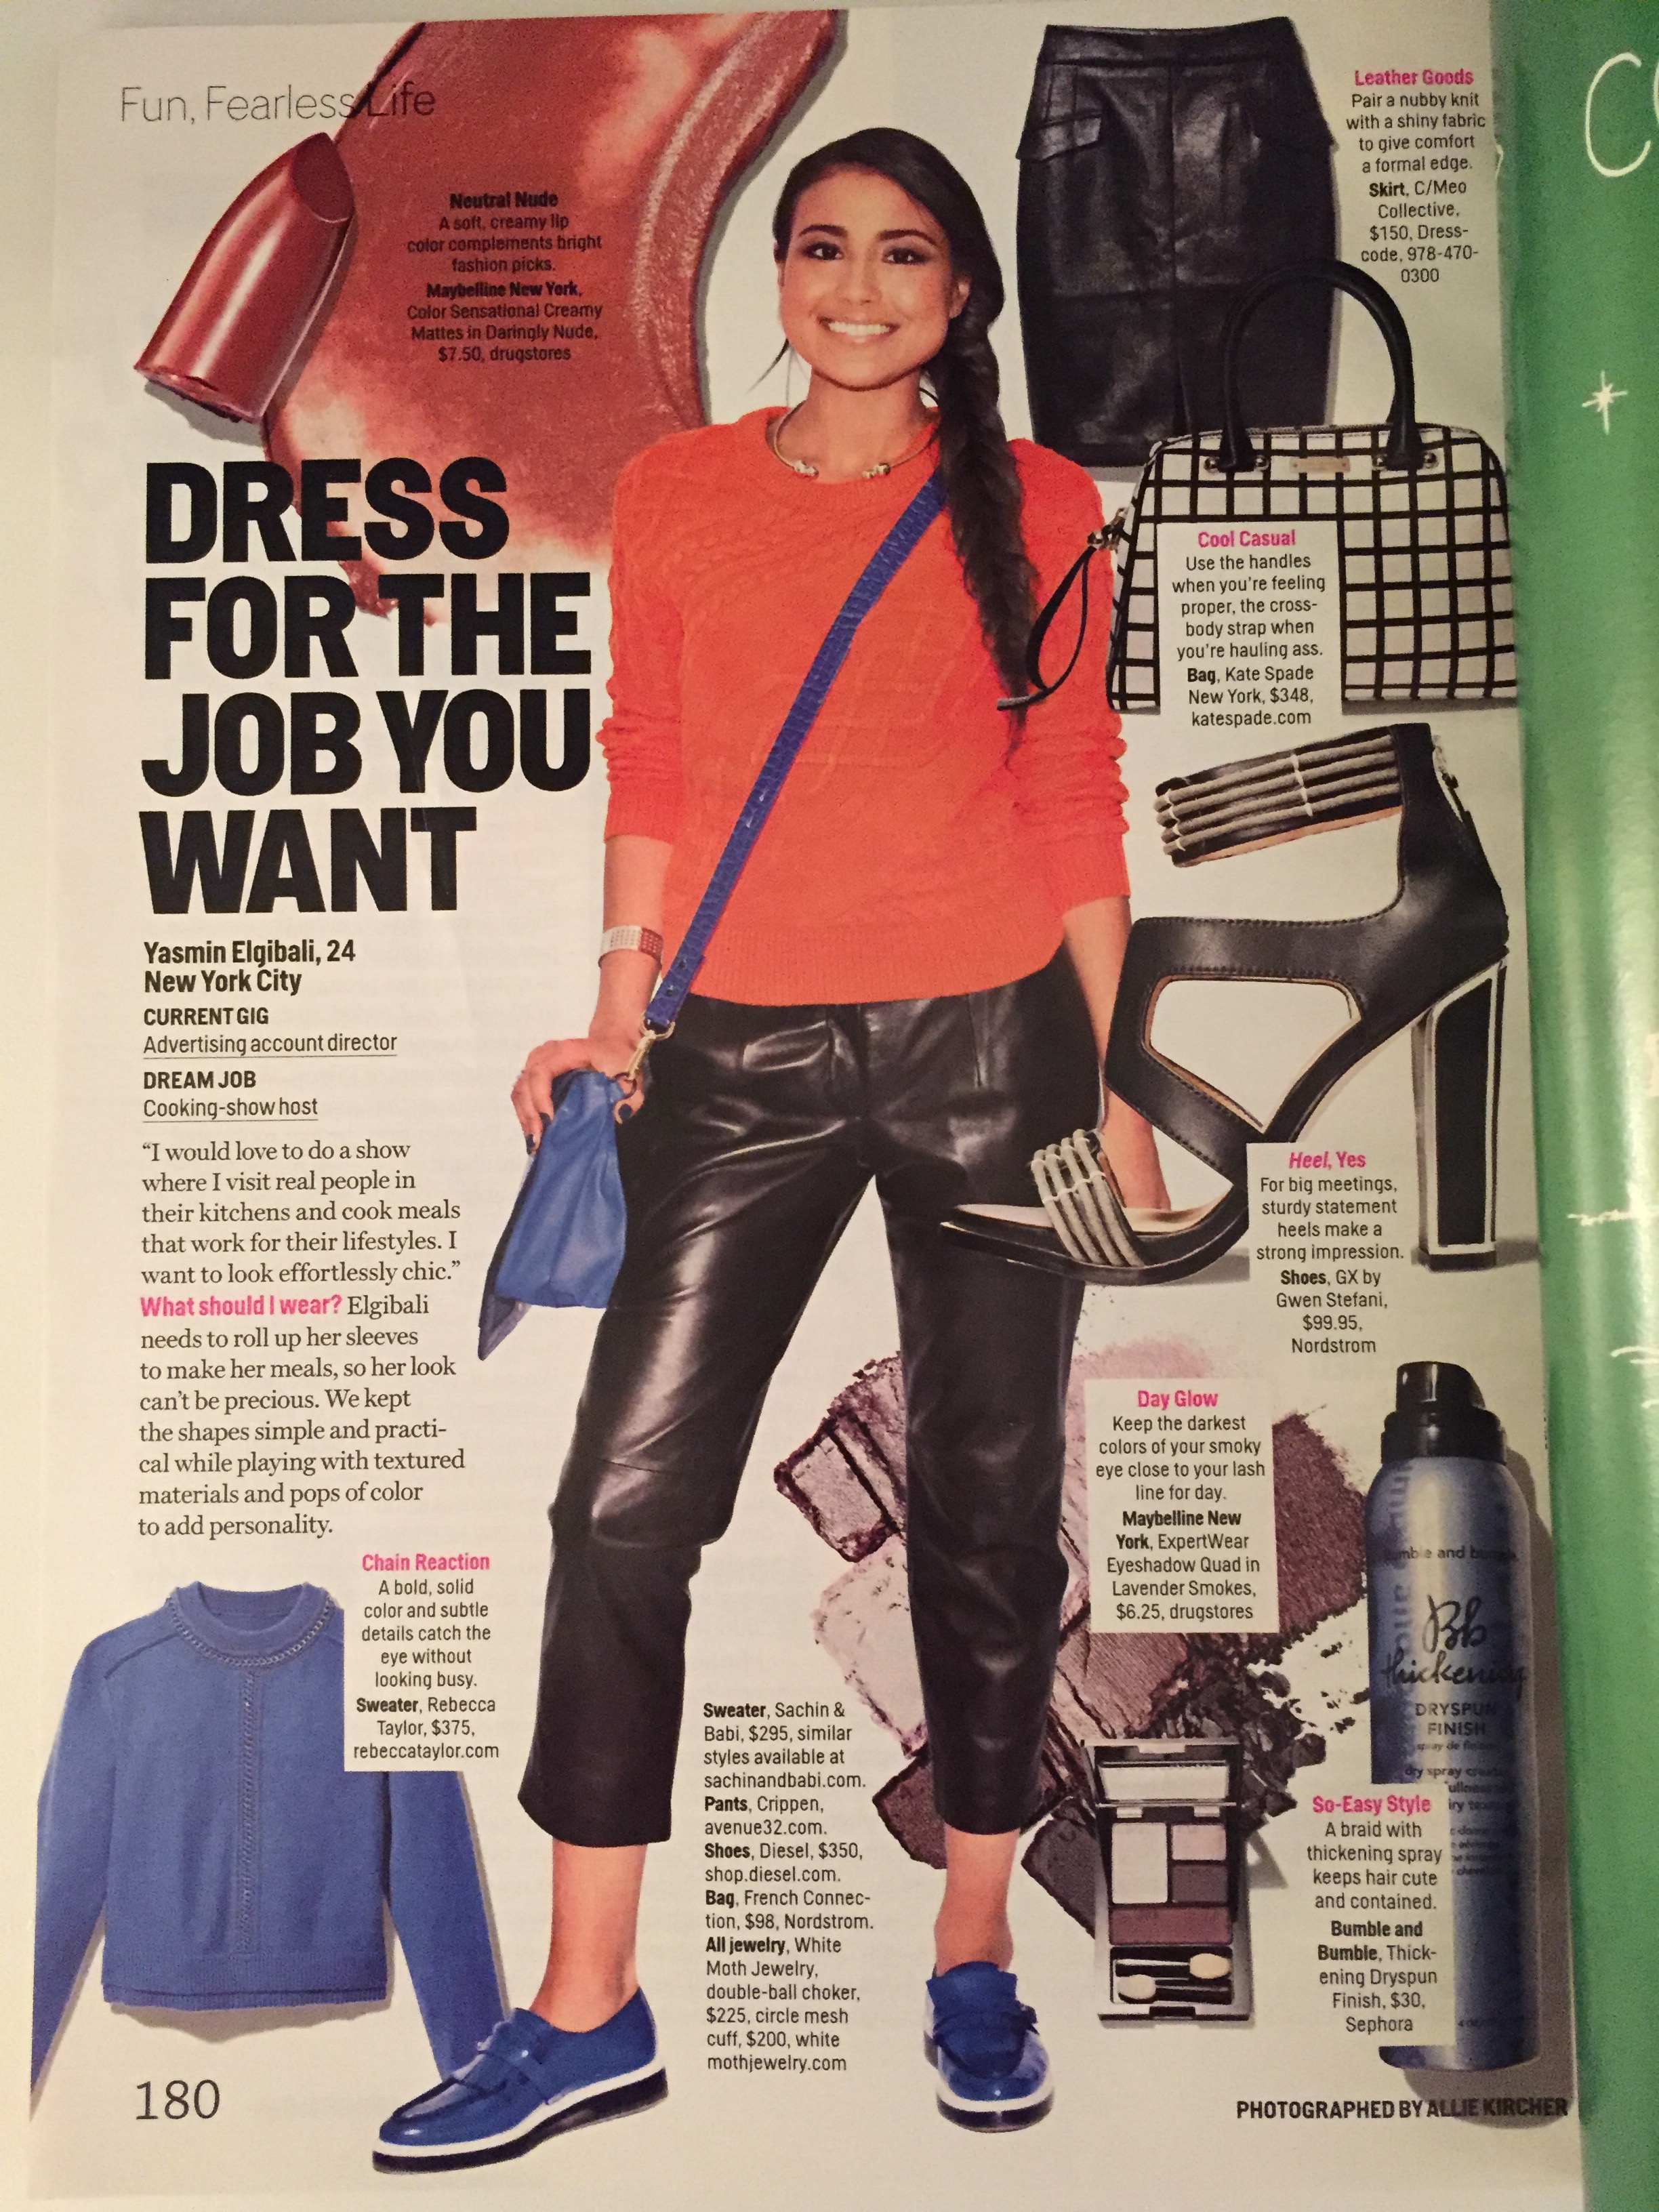 Yasmin's feature in Cosmopolitan's 'Dress For The Job' page 